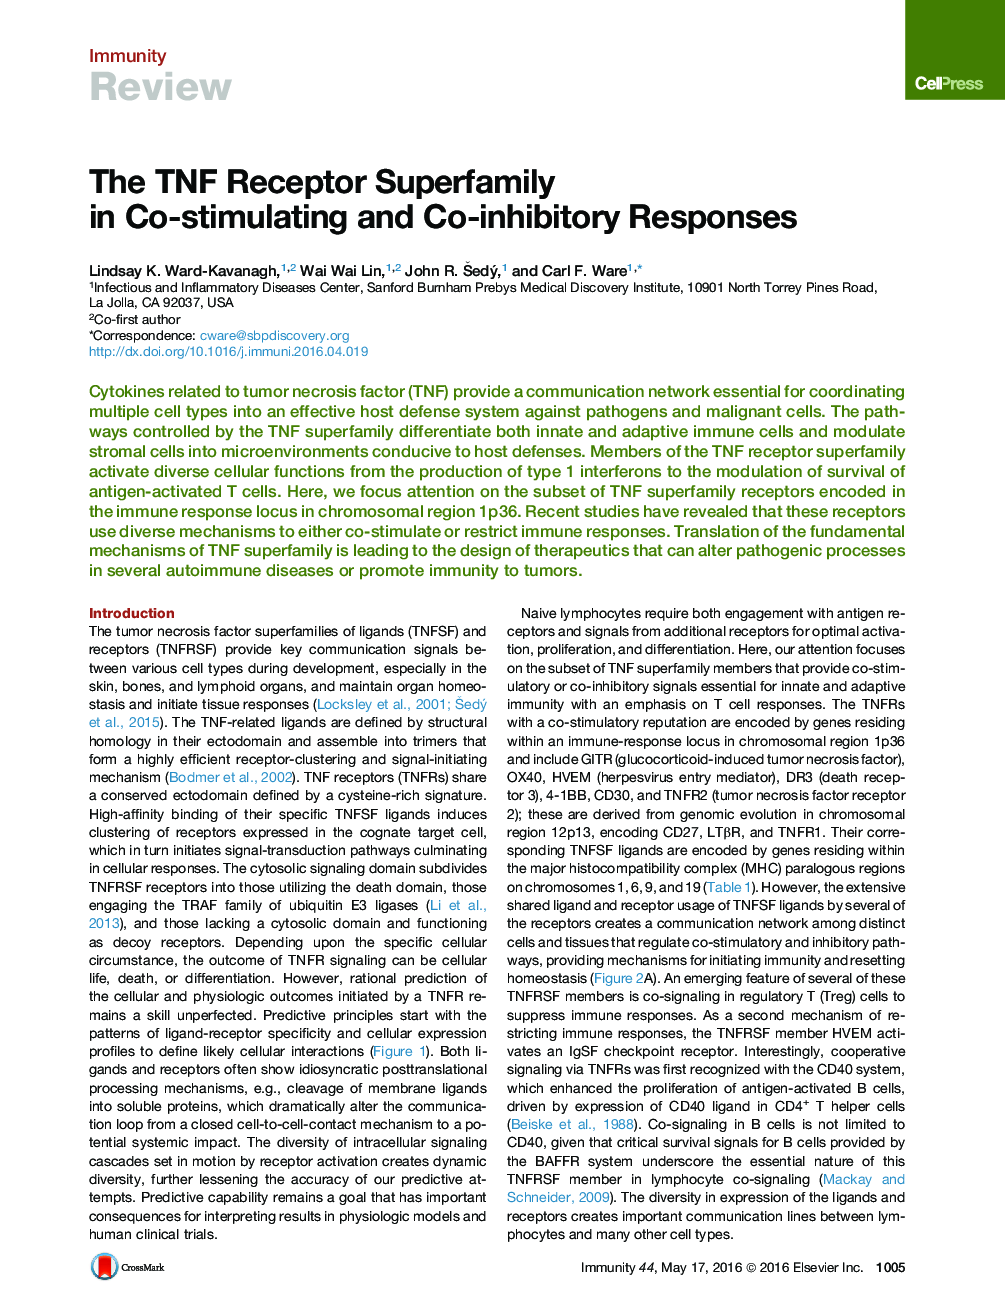 The TNF Receptor Superfamily in Co-stimulating and Co-inhibitory Responses